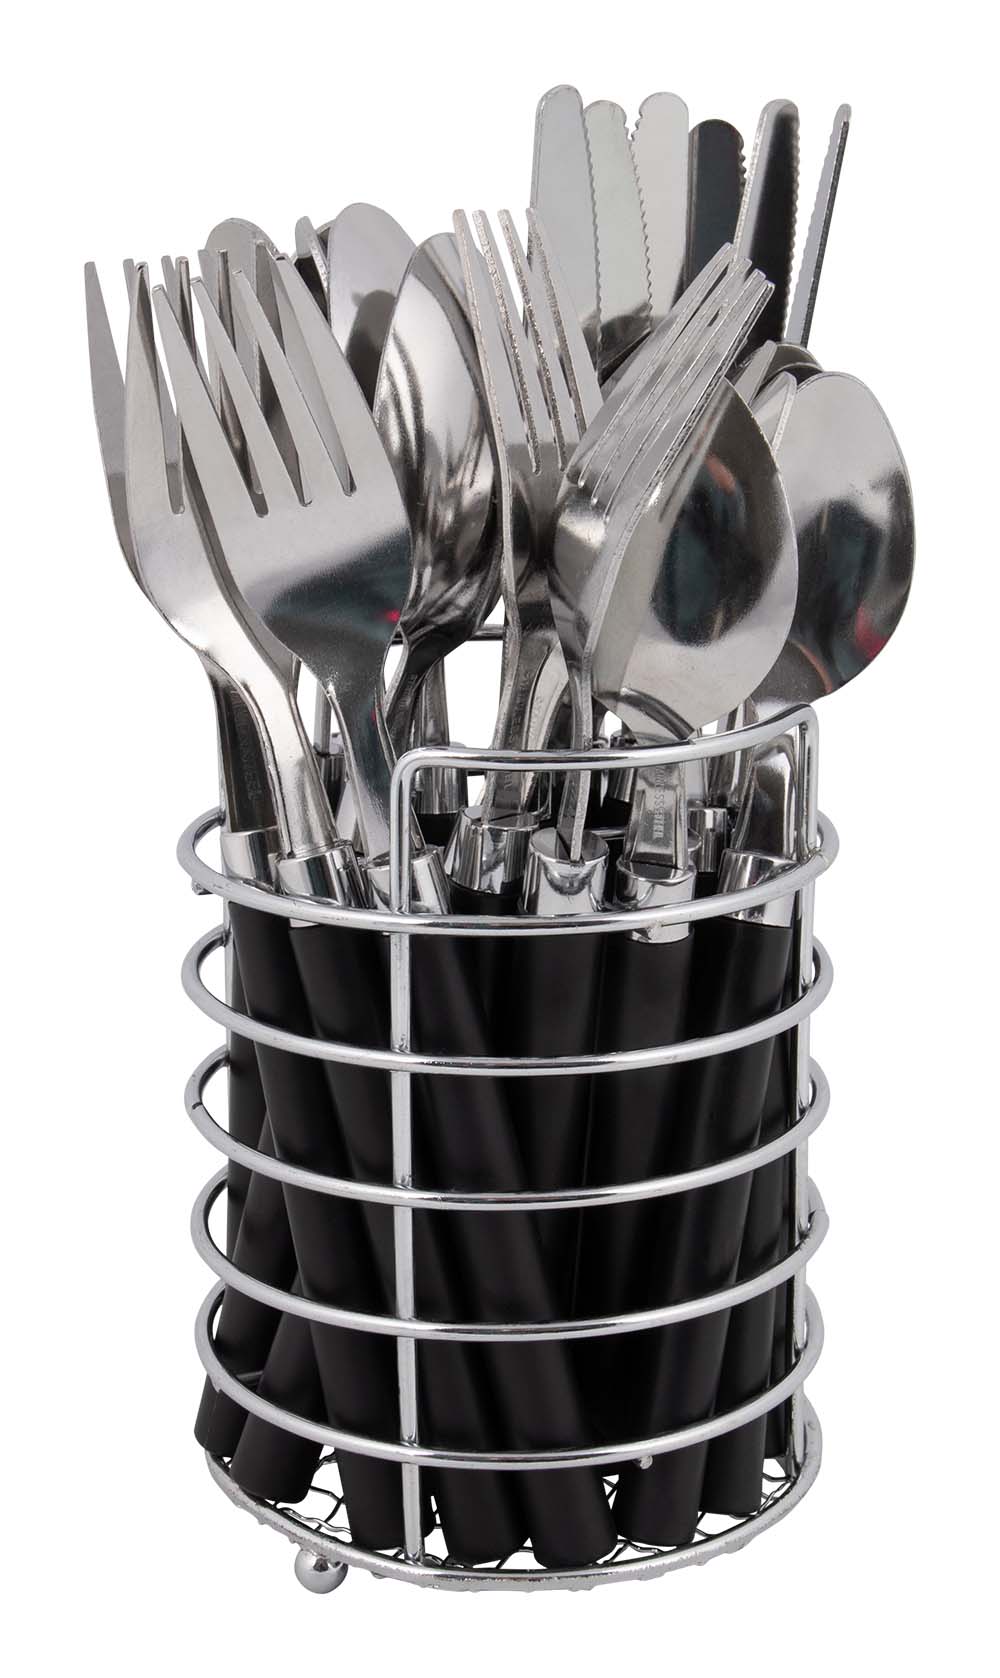 6102108 Bo-Camp - Cutlery set - With basket - RVS - 24 Pieces - 6 Persons - Black